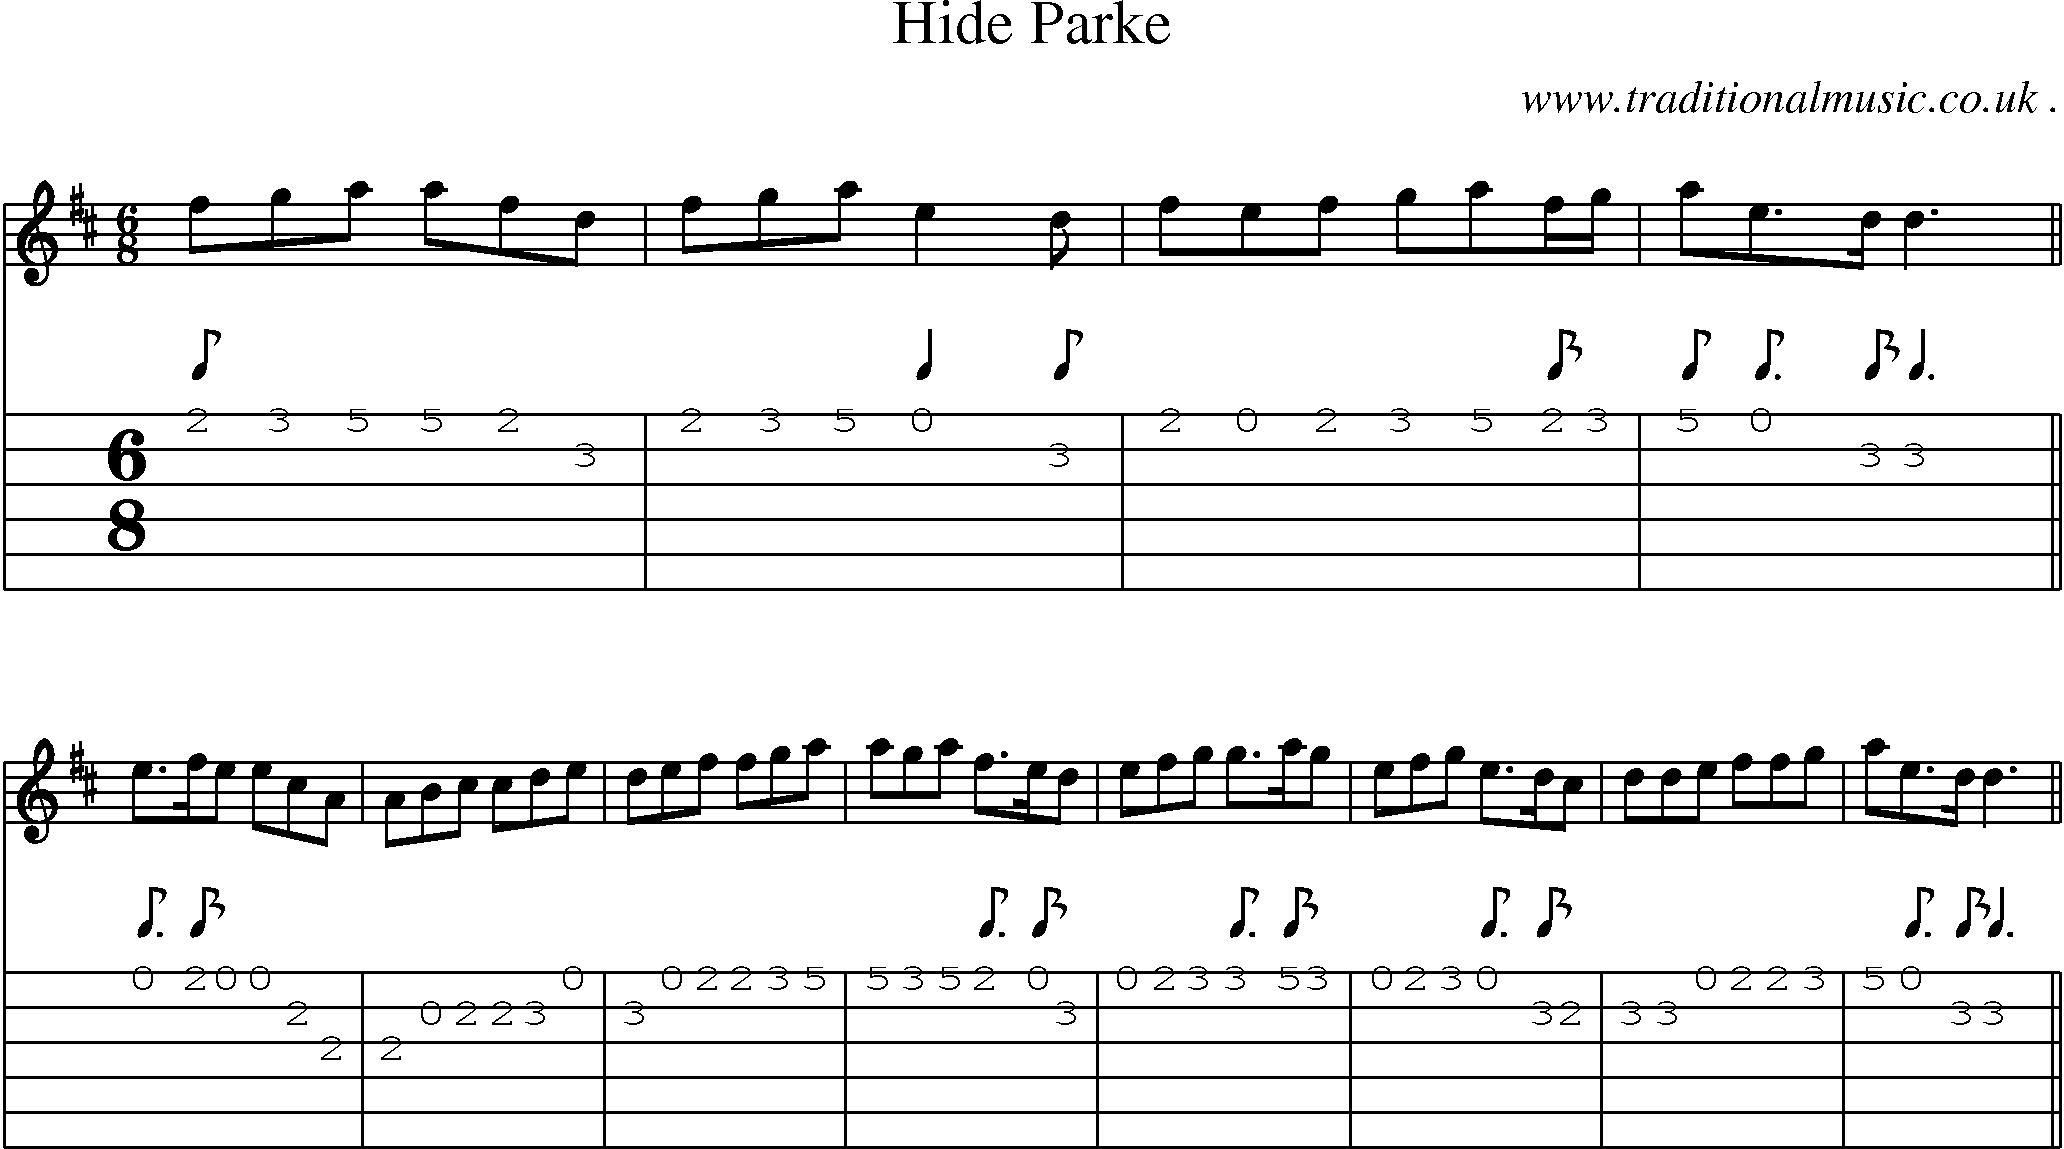 Sheet-Music and Guitar Tabs for Hide Parke